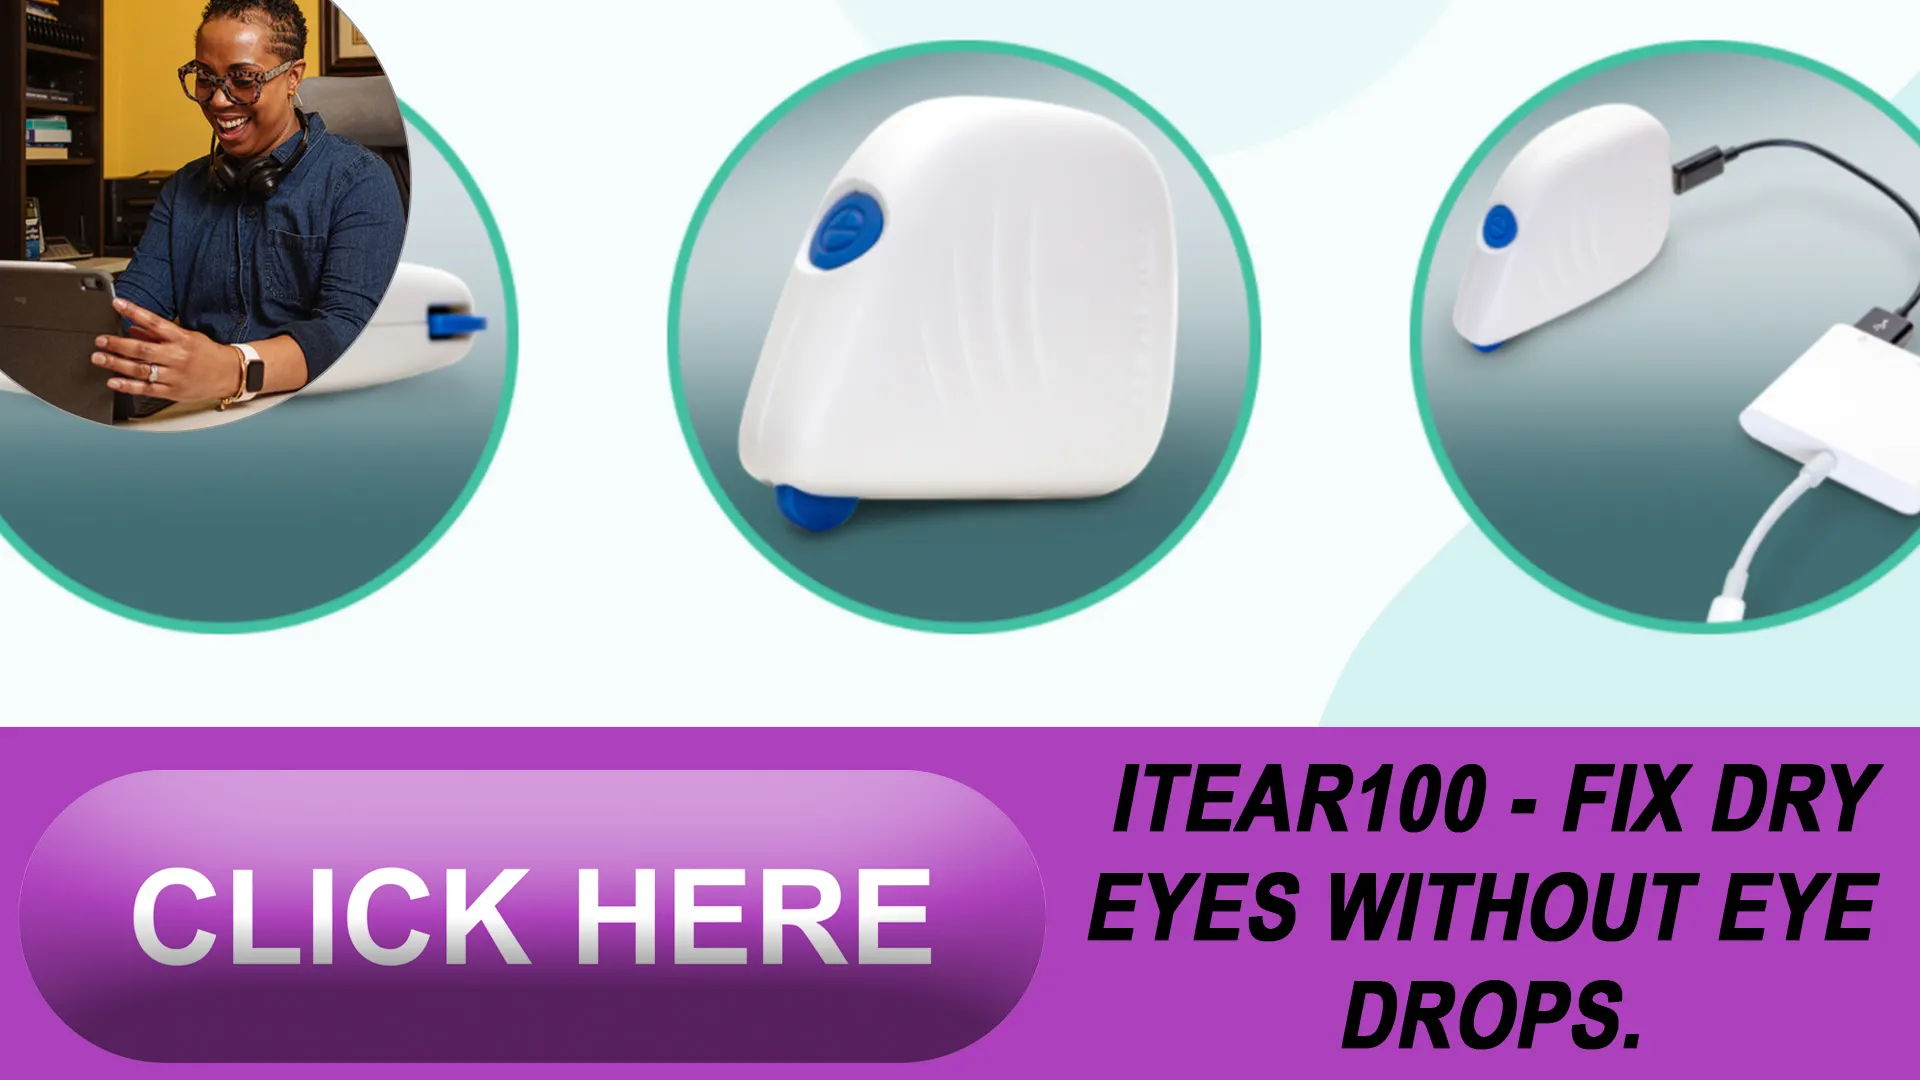  Introducing the iTEAR100 for Dry Eye Relief 